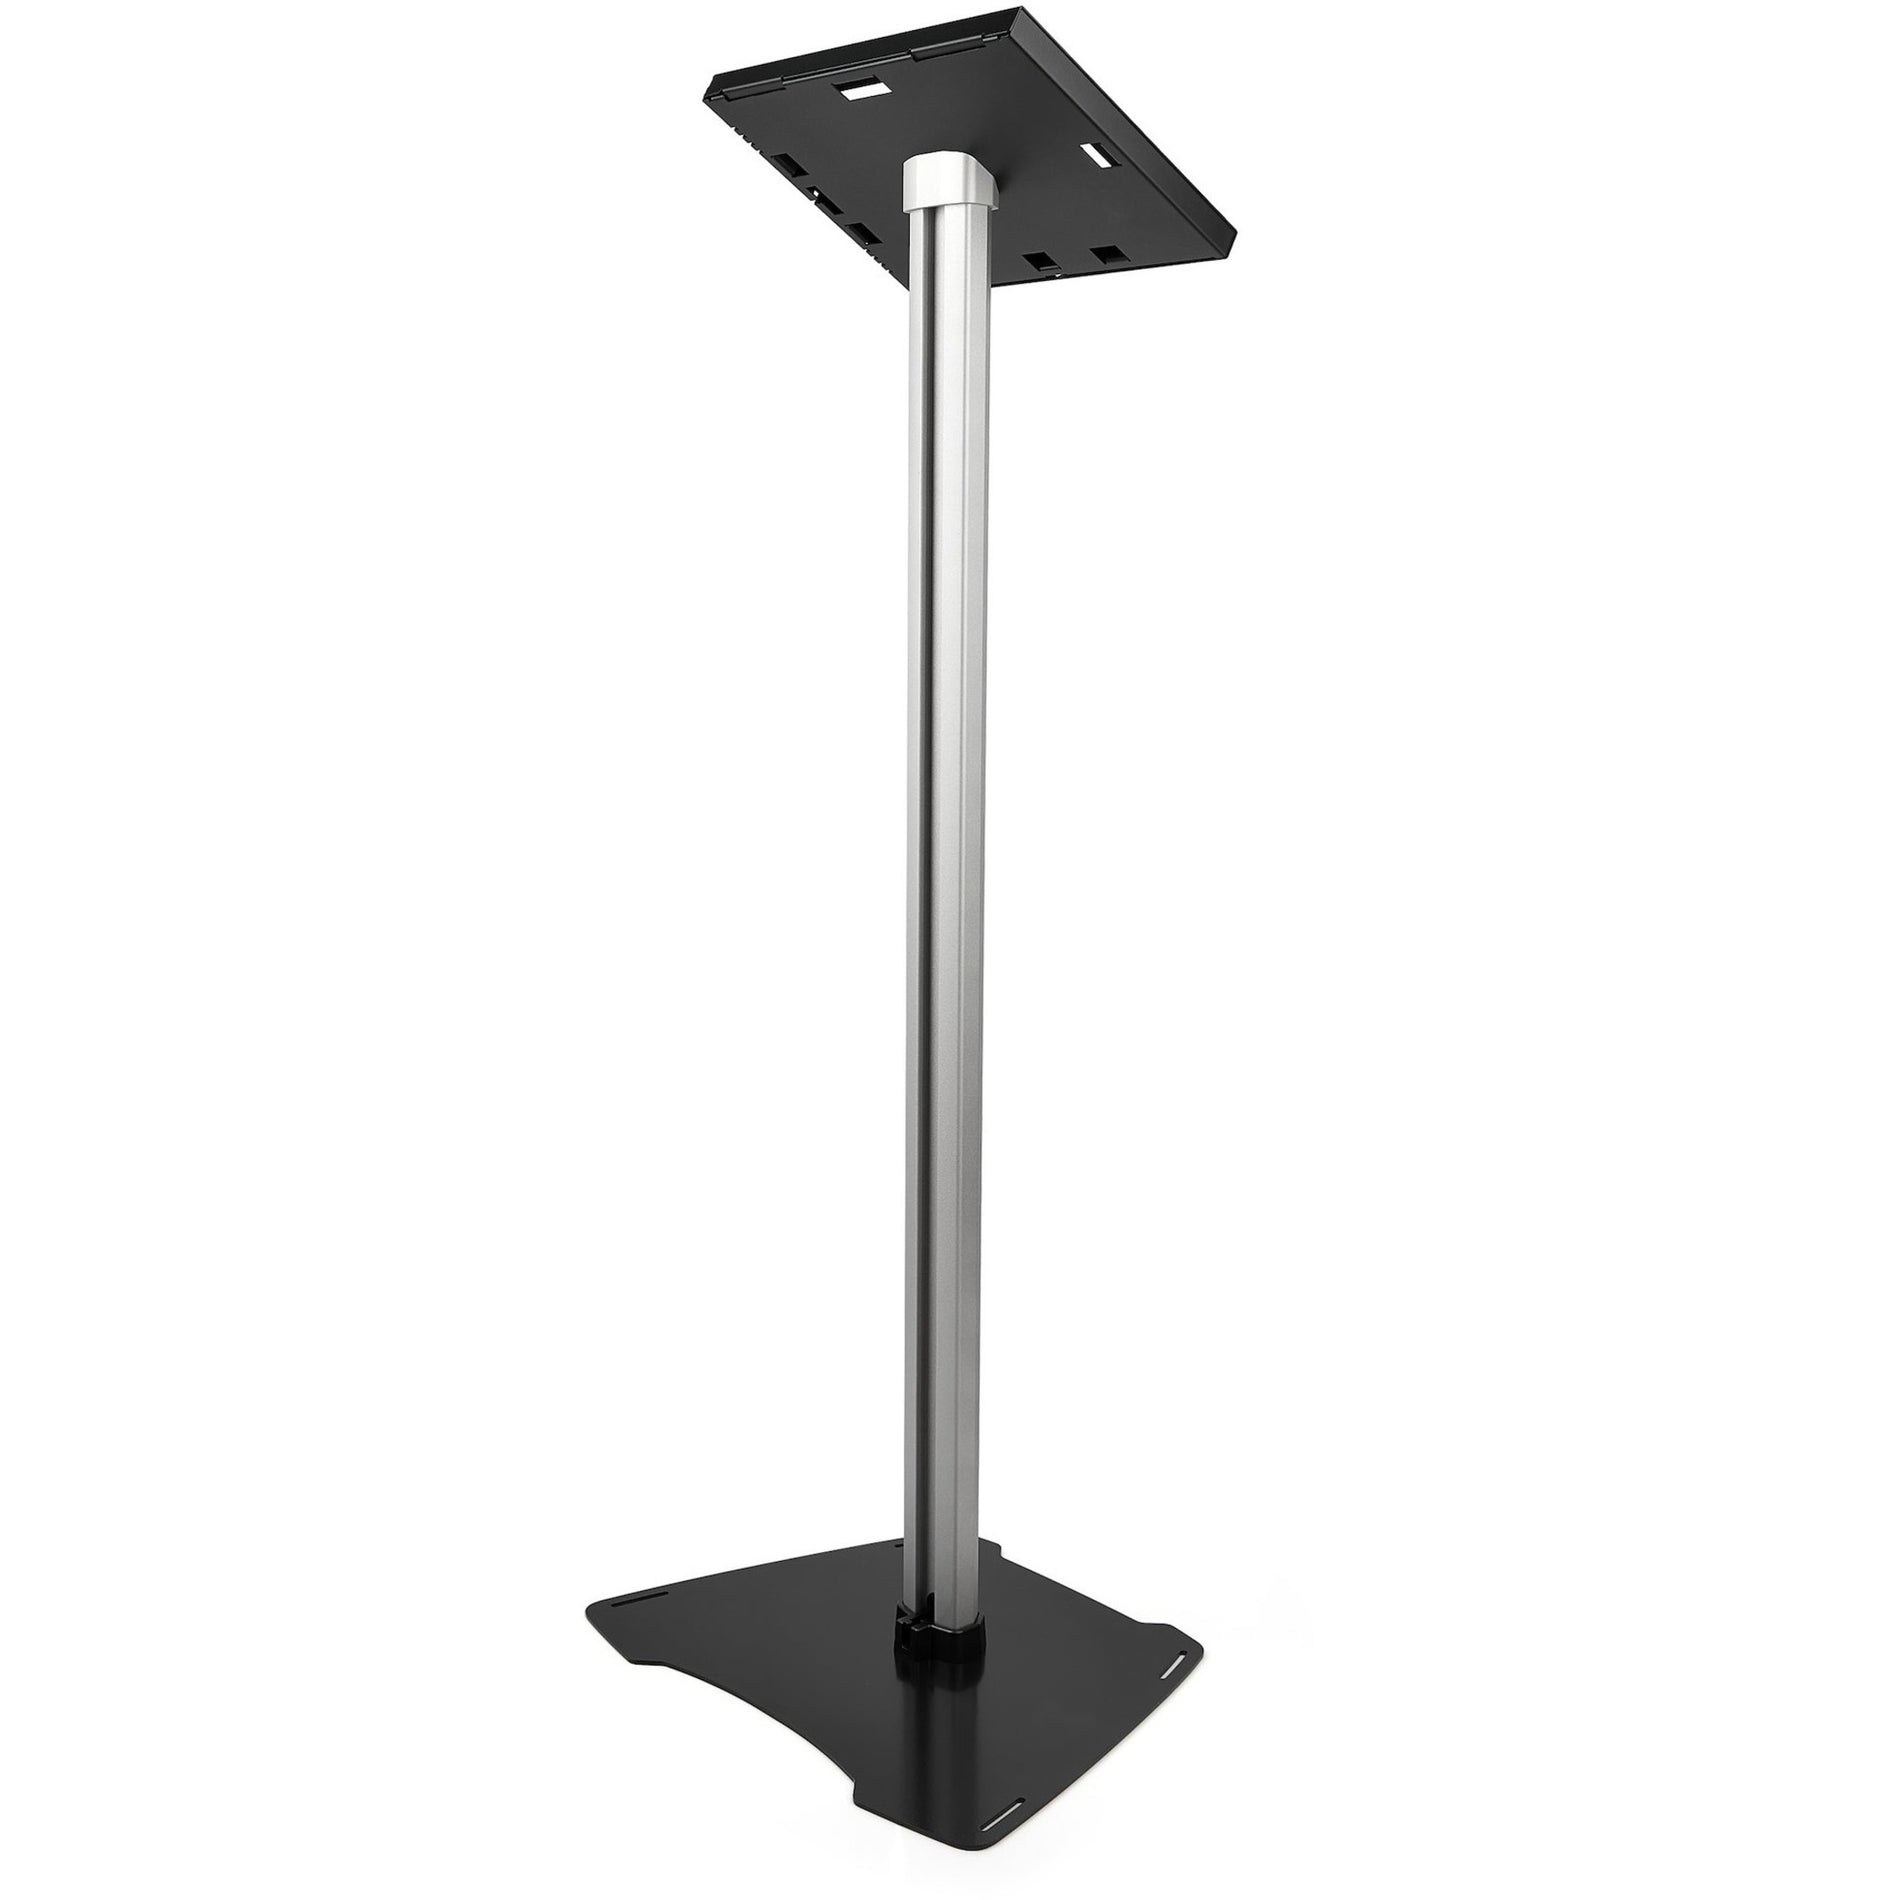 StarTech.com STNDTBLT1FS Secure Tablet Floor Stand - Anti-Theft, Adjustable Height, 9.7" Screen Support, TAA Compliant